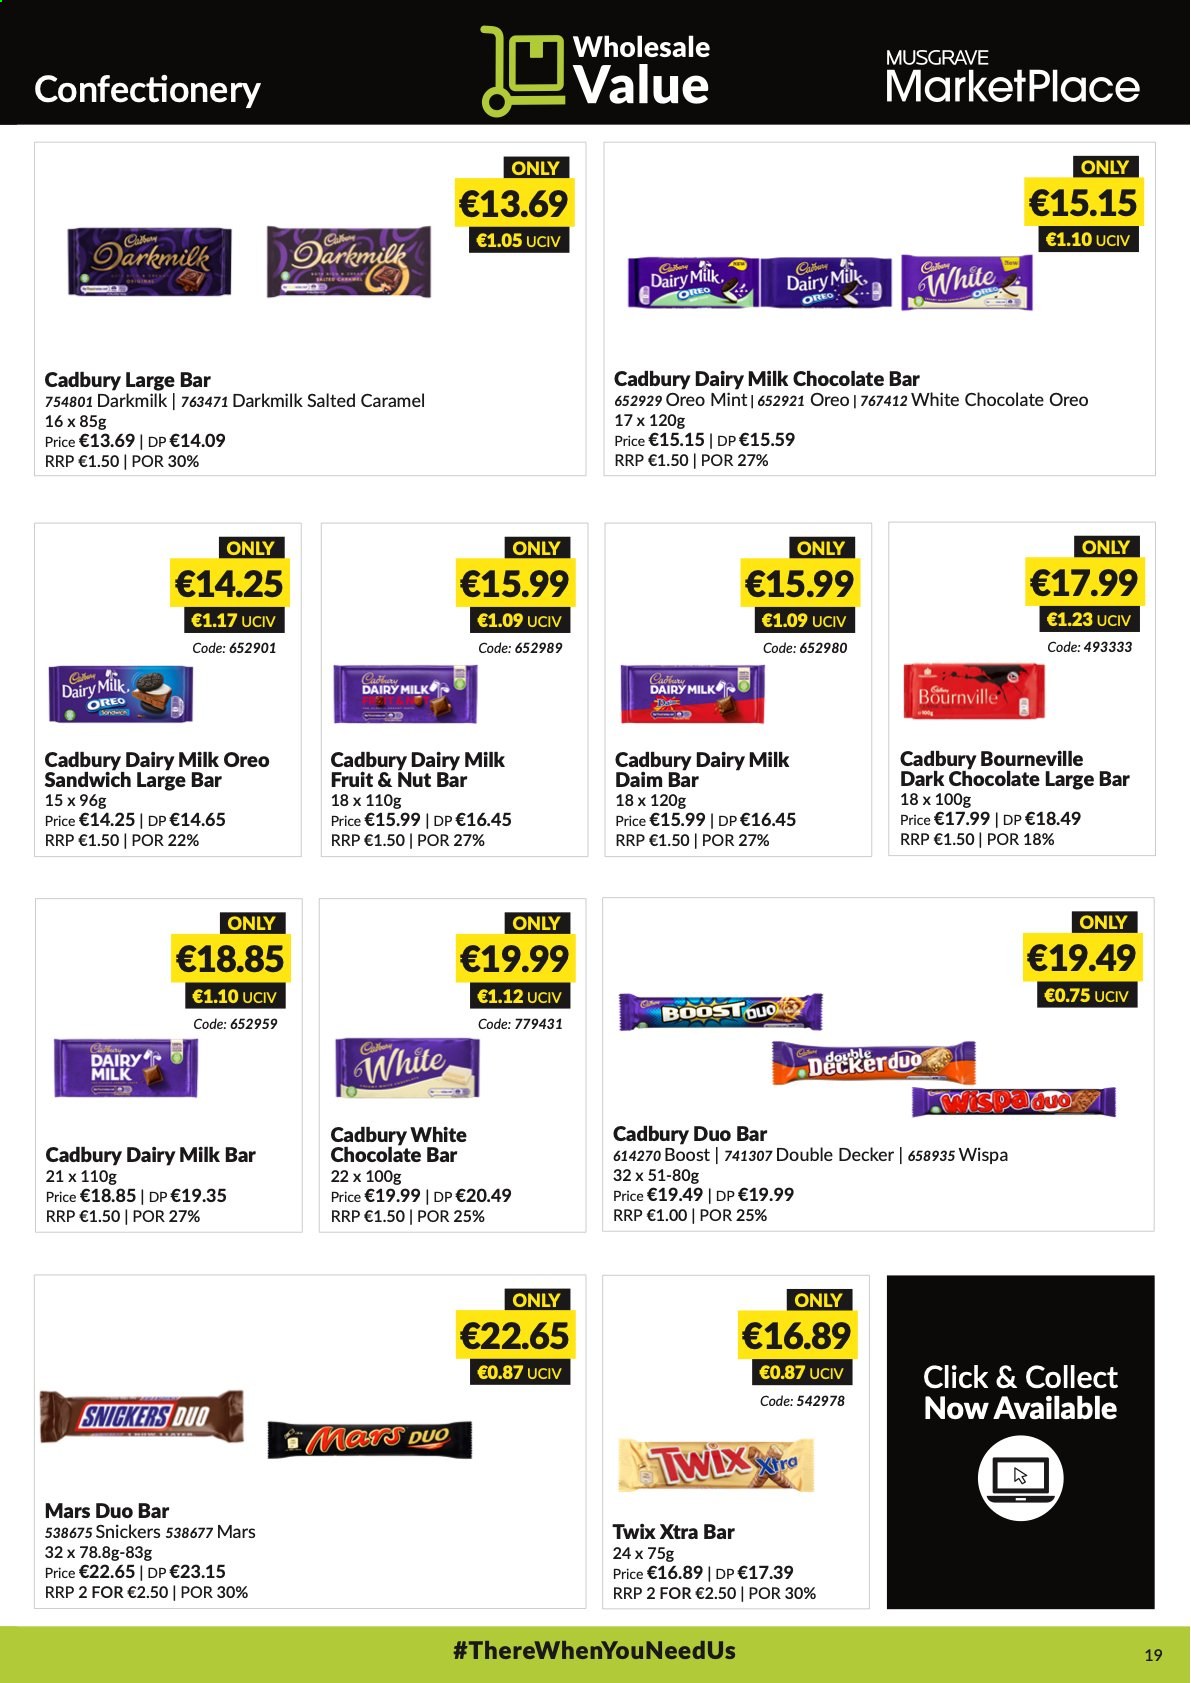 thumbnail - MUSGRAVE Market Place offer  - 09.05.2021 - 05.06.2021 - Sales products - sandwich, Oreo, milk chocolate, white chocolate, Snickers, Twix, Mars, dark chocolate, Cadbury, Dairy Milk, chocolate bar, nut bar, Boost. Page 19.